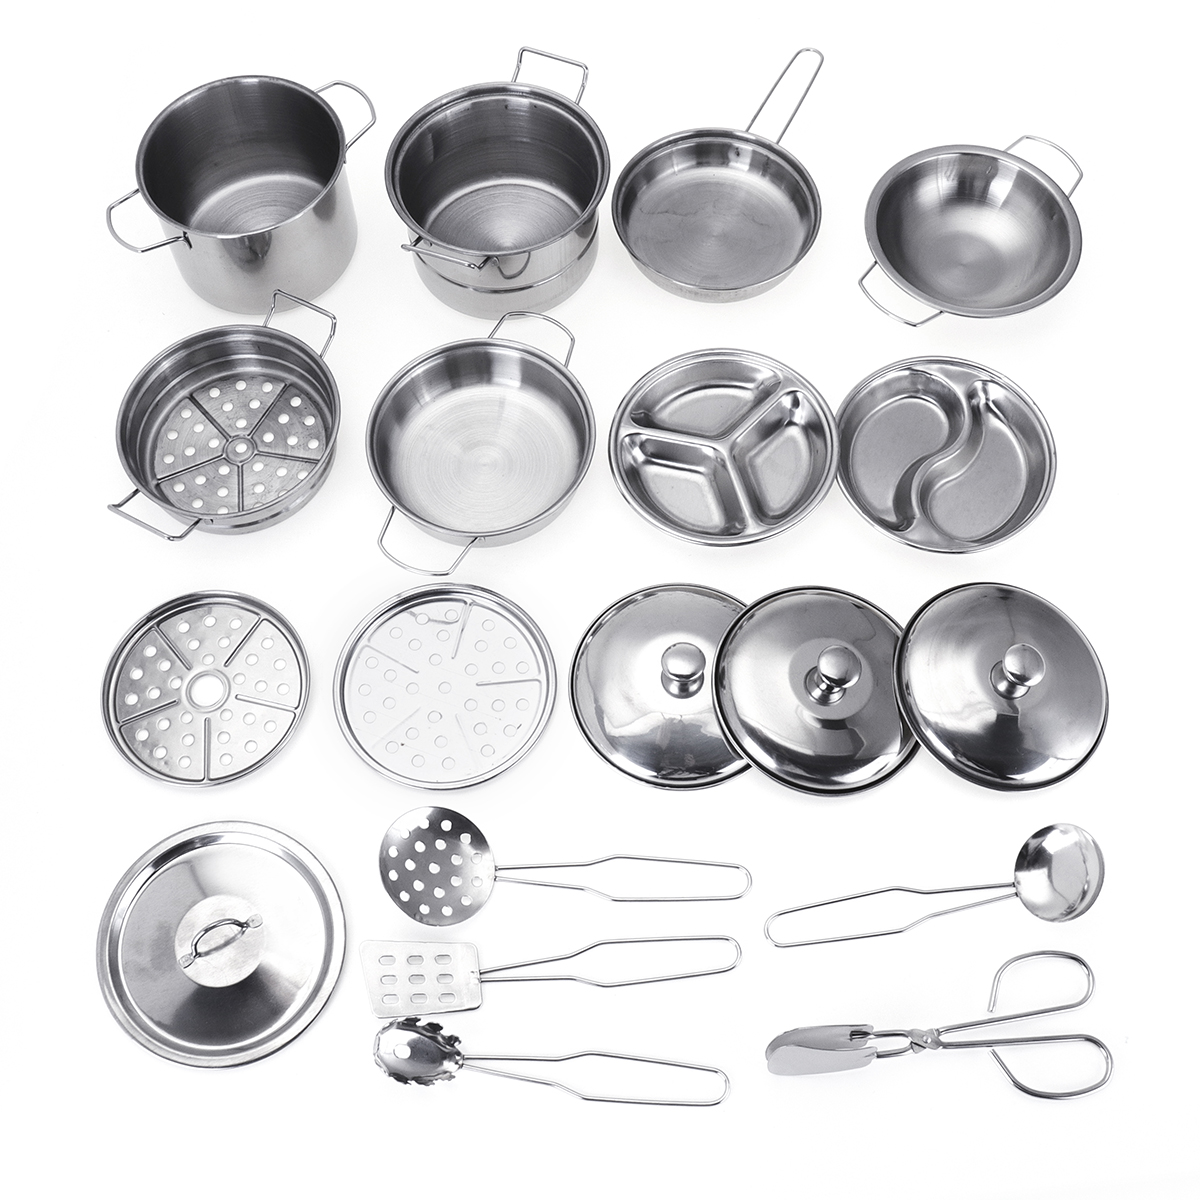 32PCS-Mini-Stainless-Steel-Kitchen-Cutlery-Play-House-Food-Toy-Boiler-Kettle-Cup-Bowl-Spoon-Cookware-1423237-7